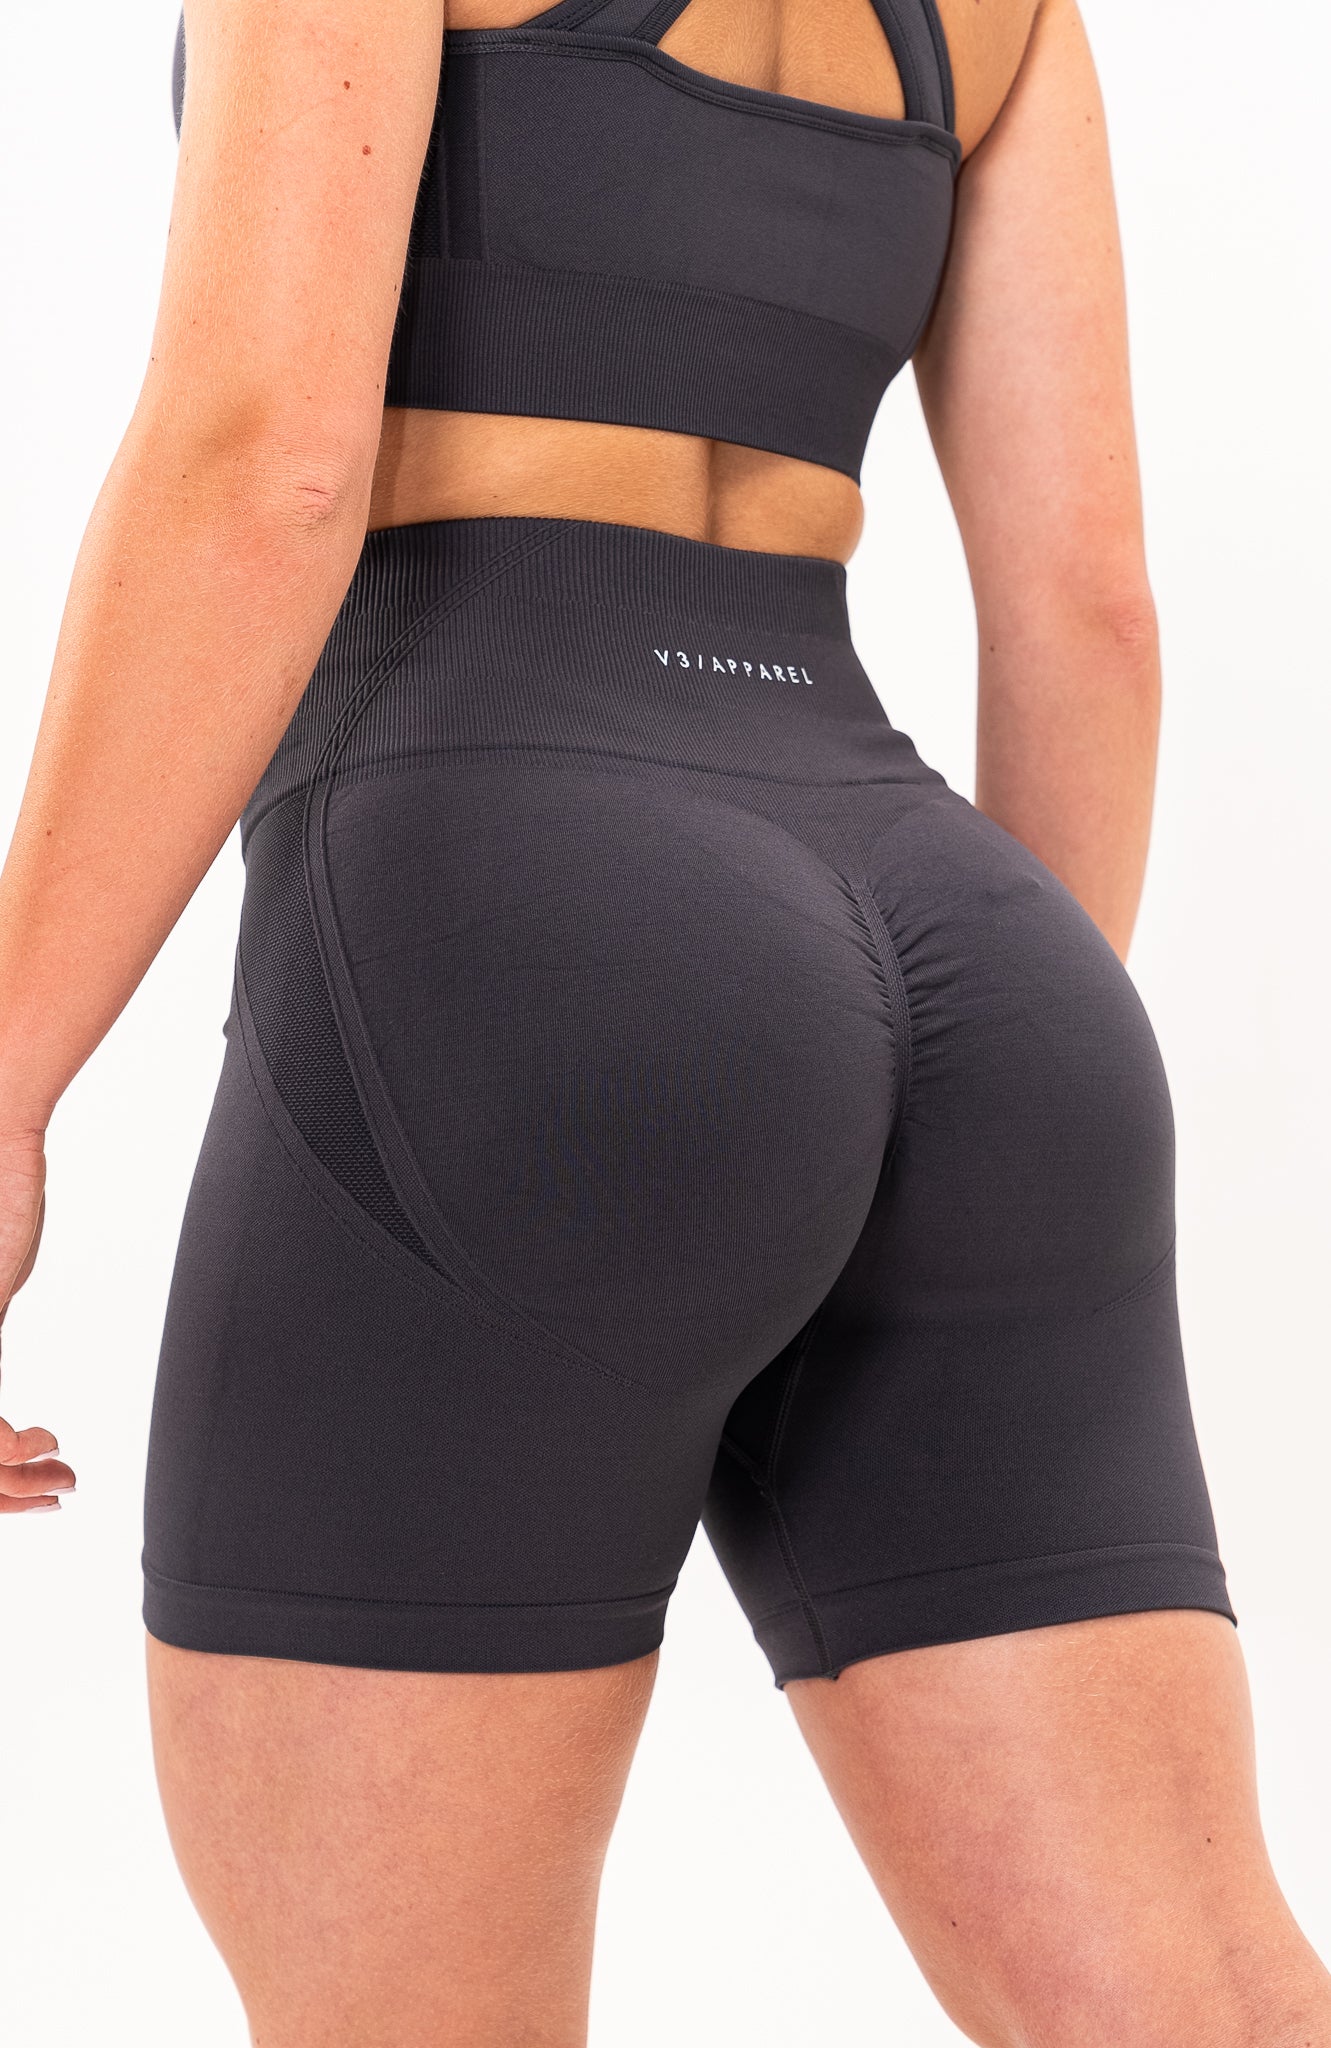 V3 Apparel Women's Tempo seamless scrunch bum shaping high waisted shorts and training sports bra in charcoal grey – Squat proof 5 inch leg cycle shorts and training bra for Gym workouts training, Running, yoga, bodybuilding and bikini fitness.